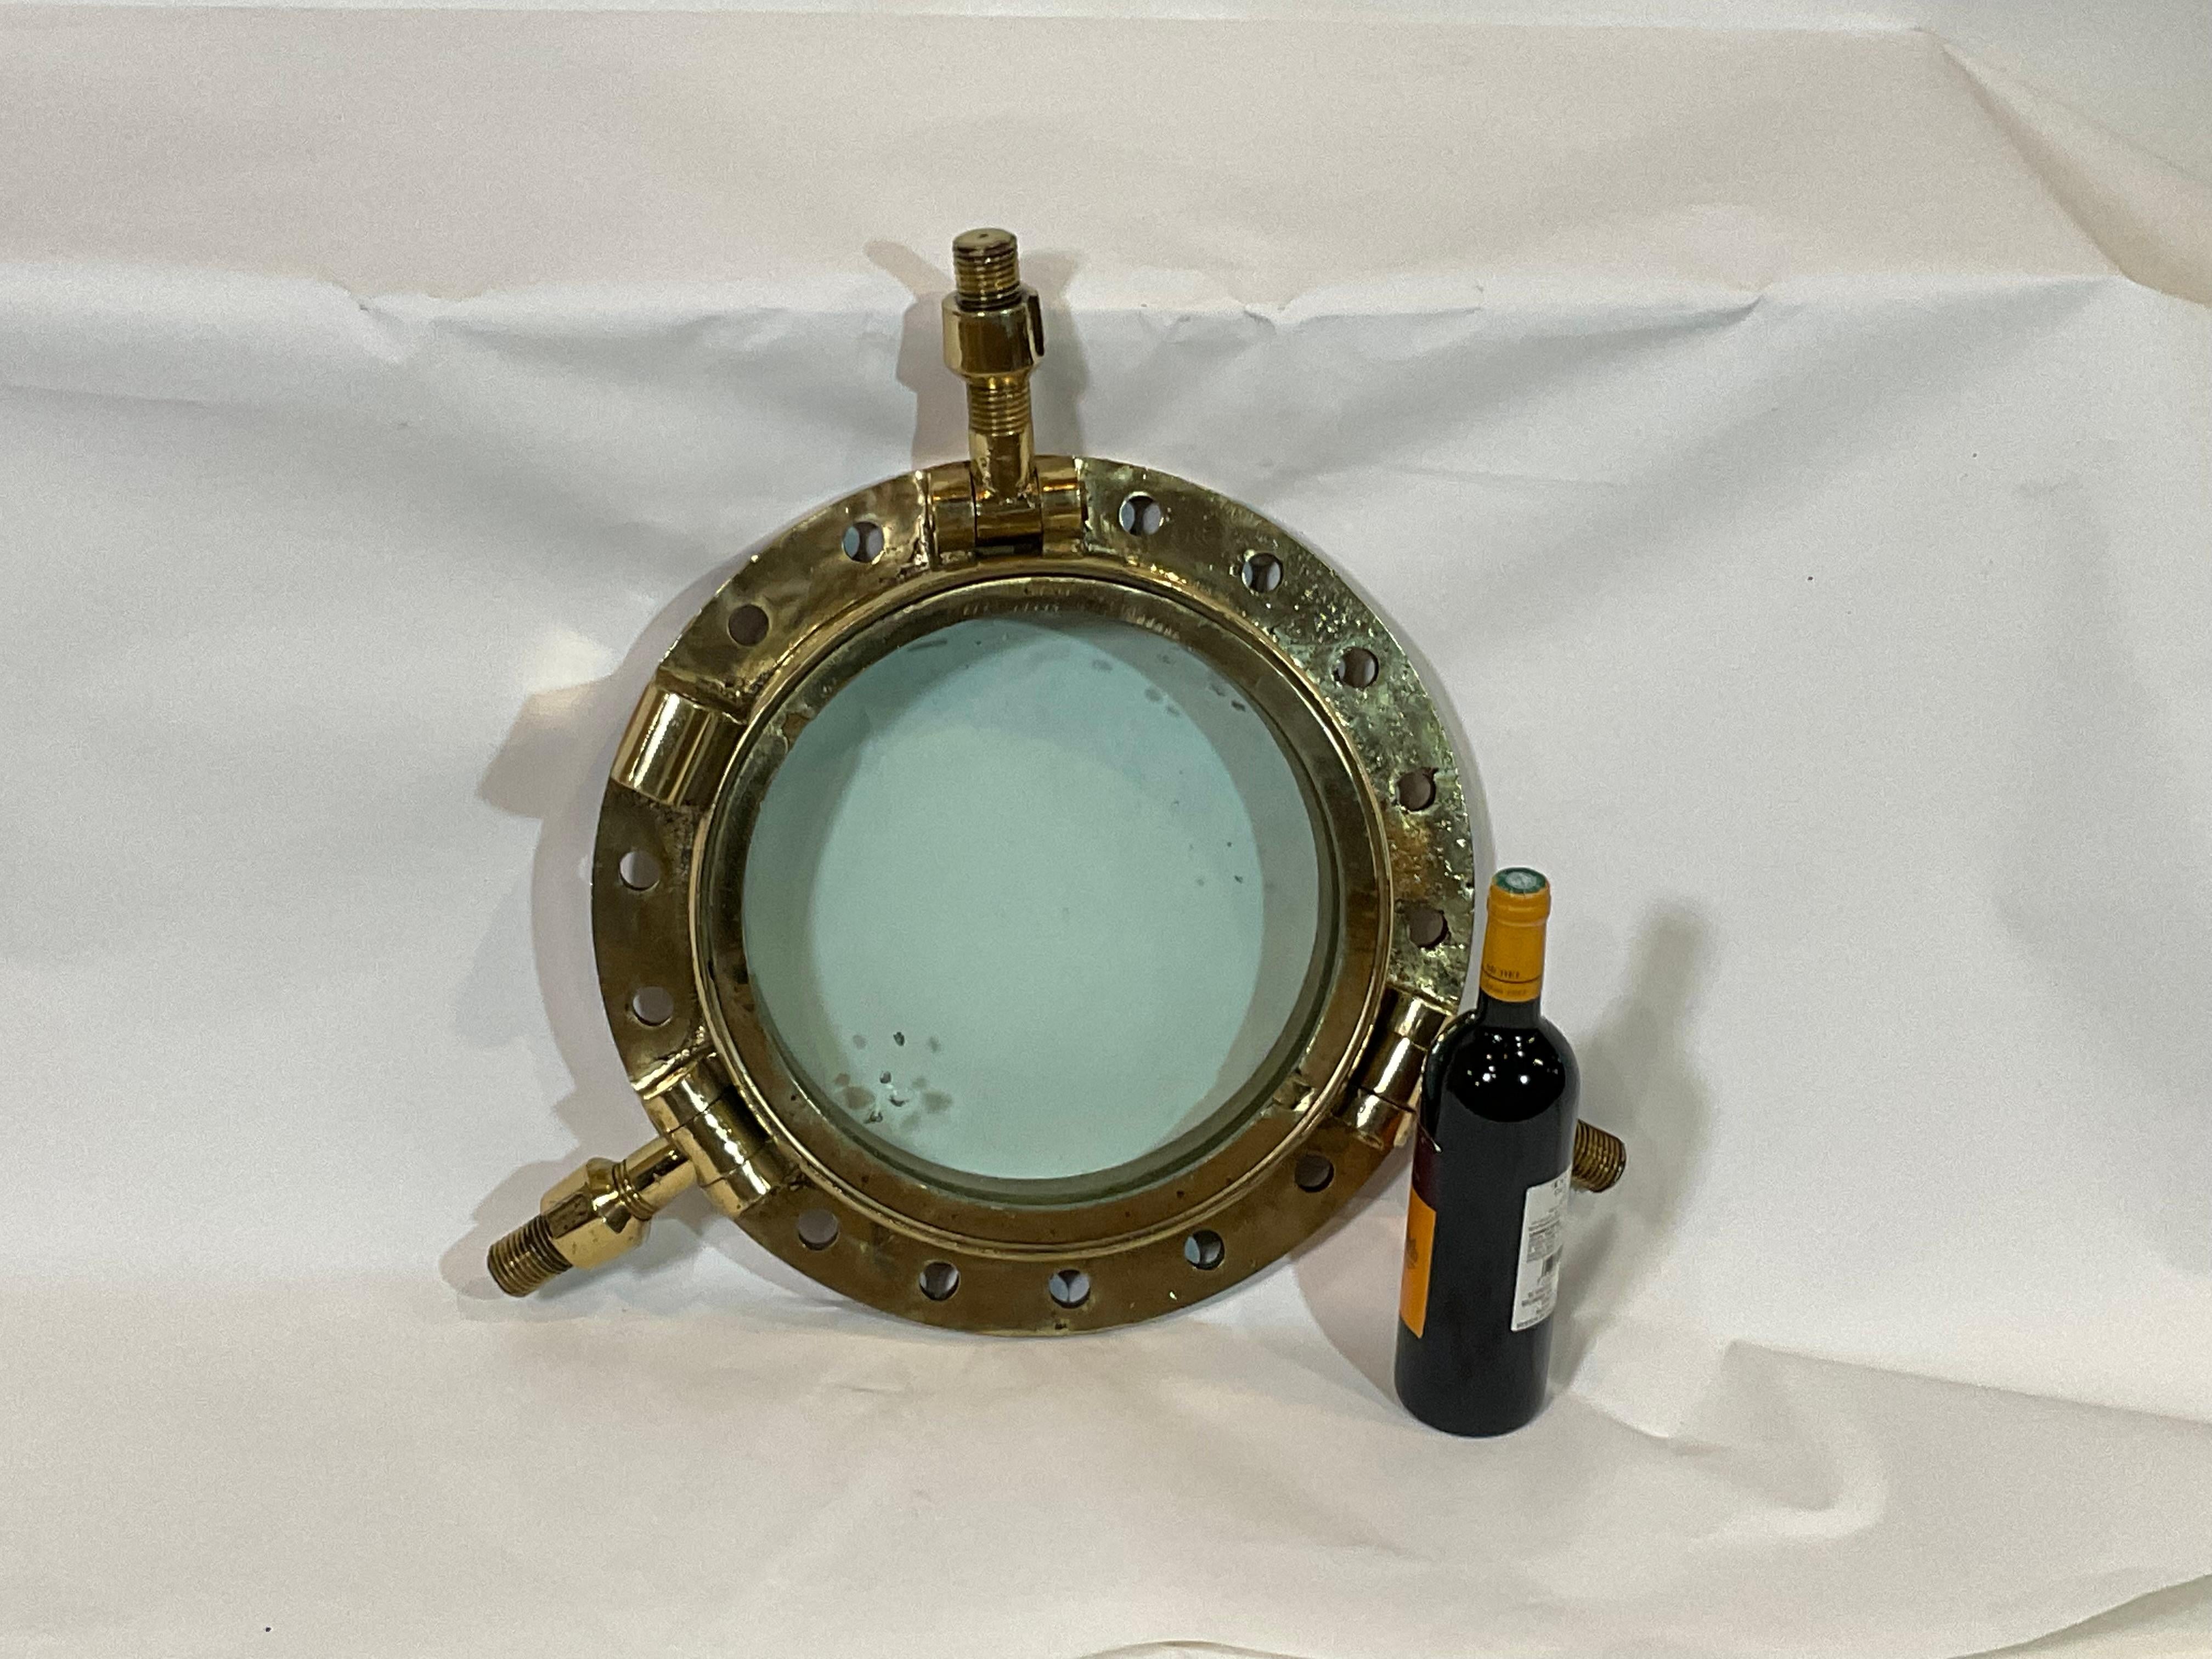 Highly polished ships porthole with lacquered finish. Early 20th century very heavy relic with tempered glass. The original glass shows imperfections from years at sea. Pierced with many mounting holes. Three unusual bras mounting dogs. This is